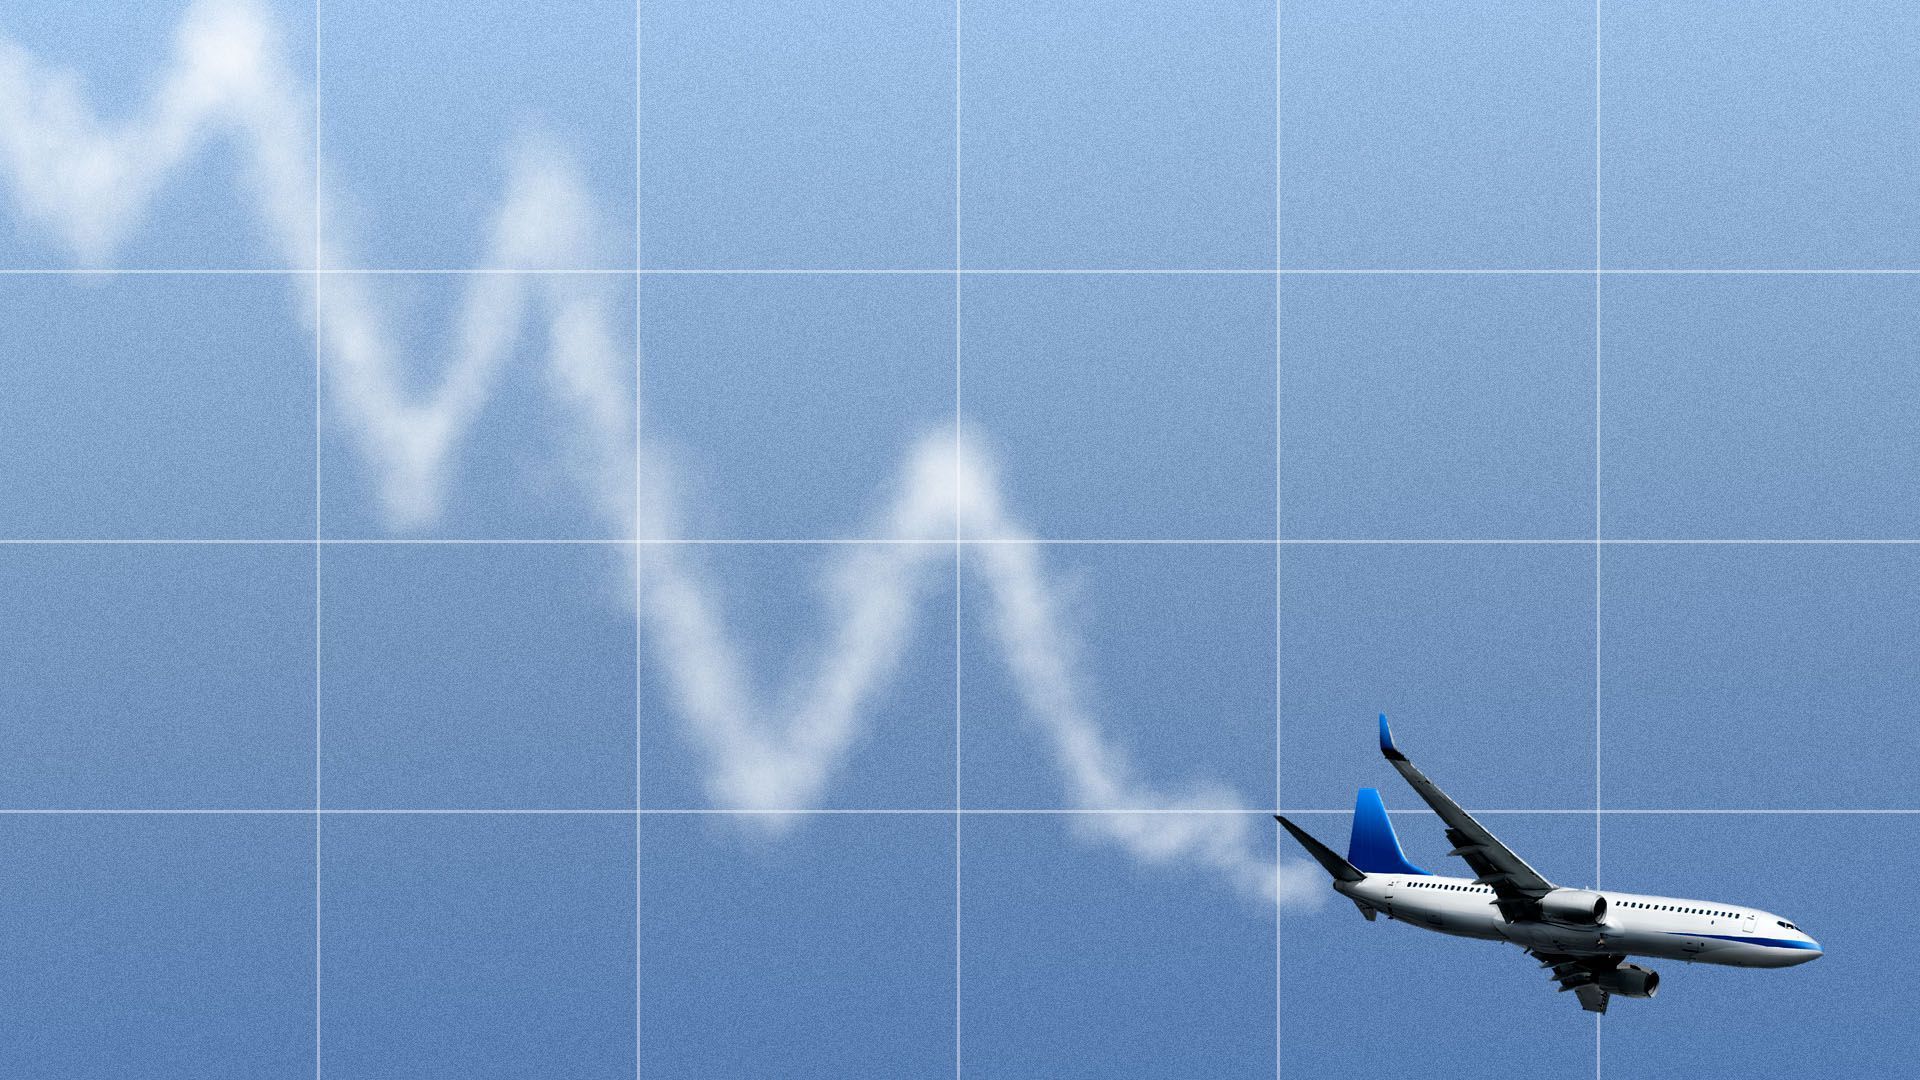 Illustration of an airplane descending on a chart